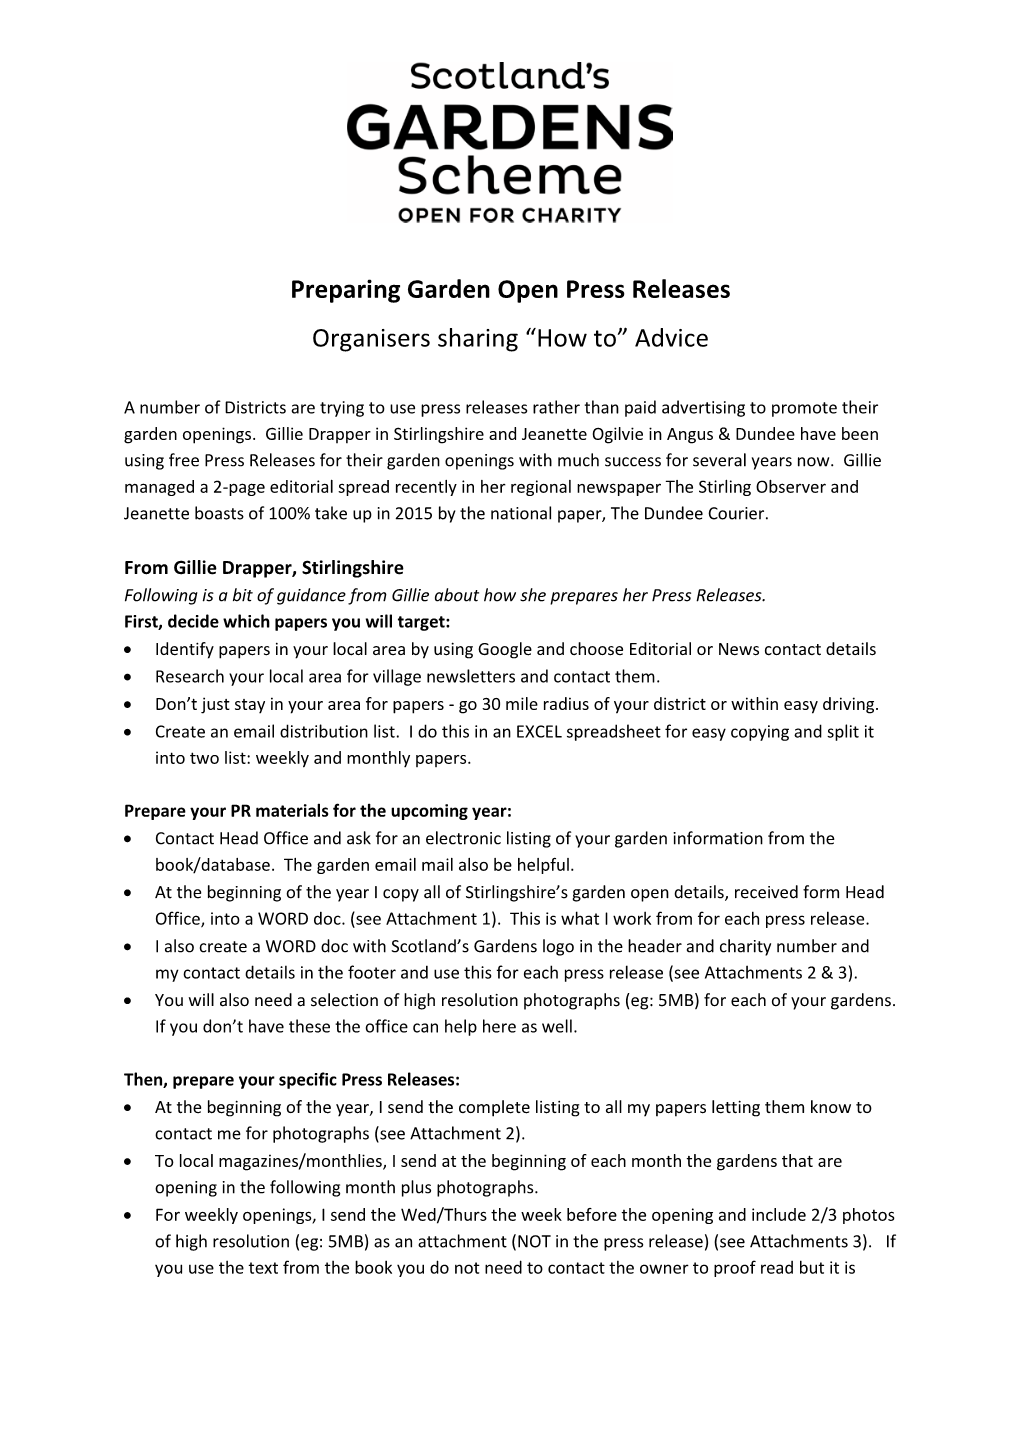 Preparing Garden Open Press Releases Organisers Sharing “How To” Advice